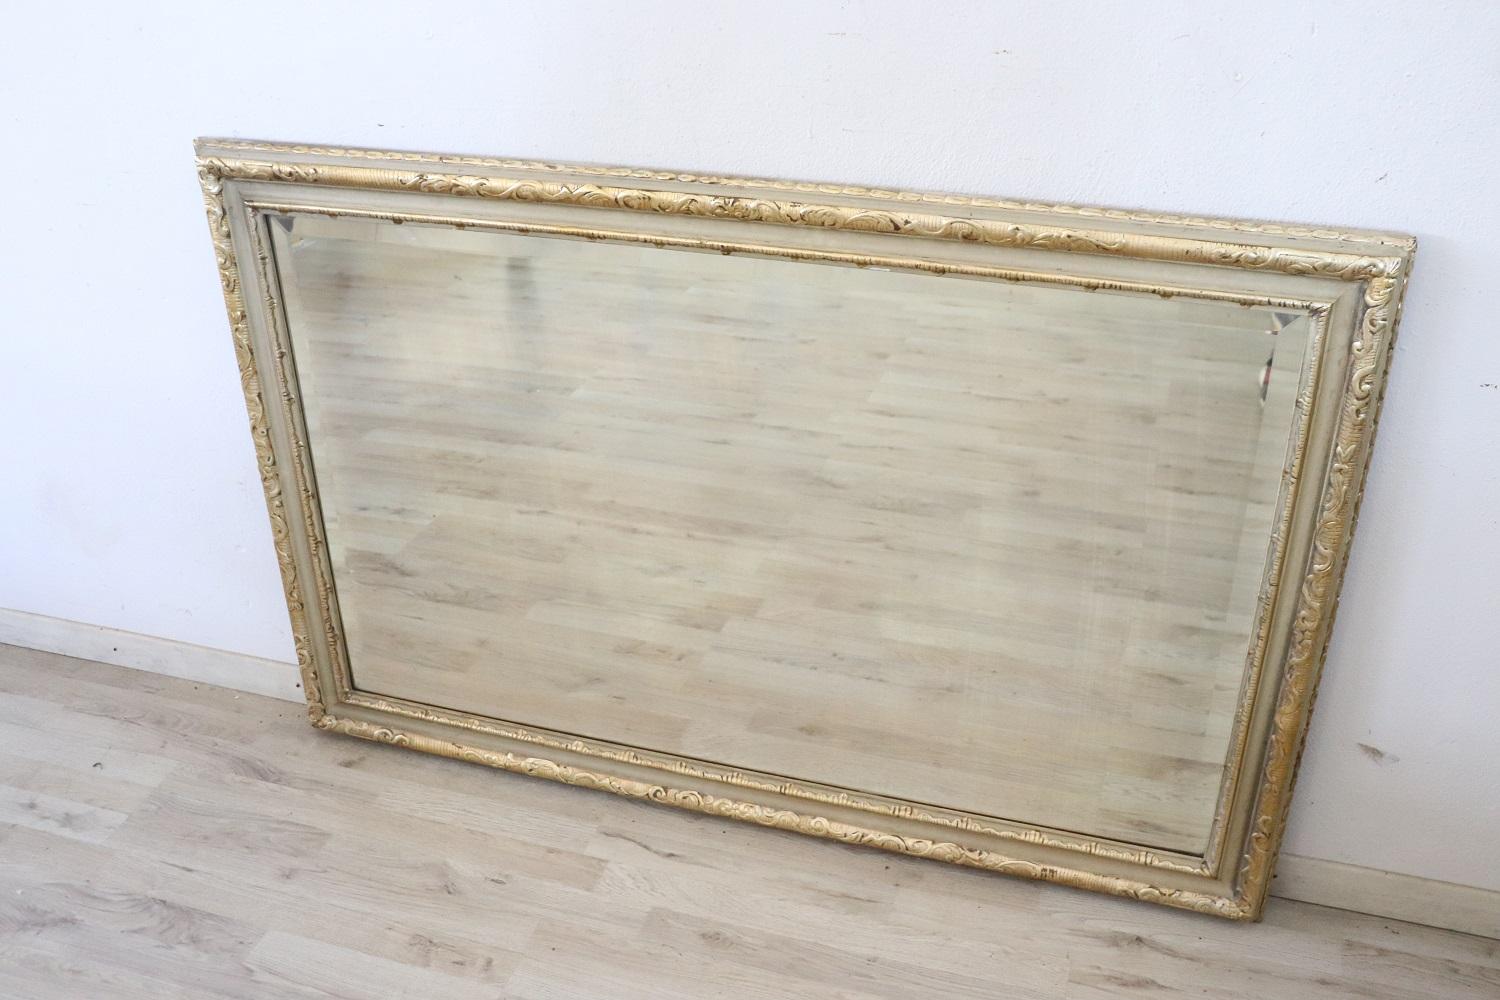 Elegant antique style wall mirror in lacquered and gilded wood.